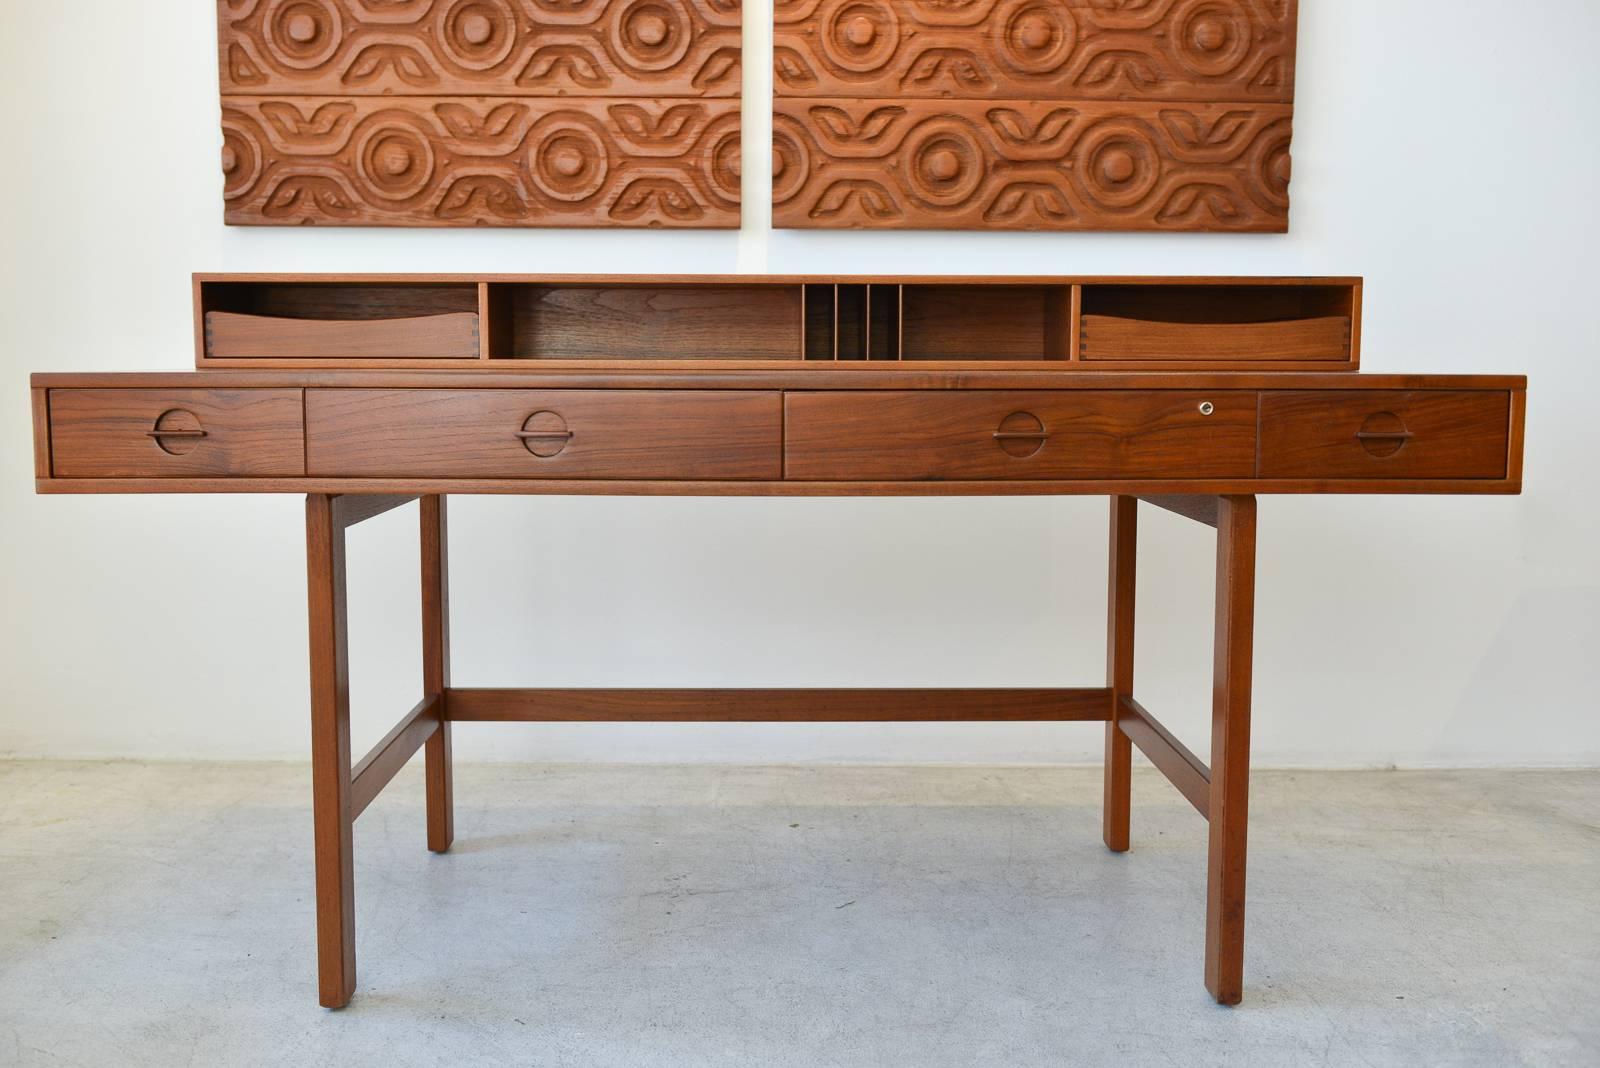 Fully restored beautiful Danish modern teak flip-top partner’s desk by Jens Quistgaard for Peter Løvig Nielsen. Beautiful sculpted pulls and unique flip-top shelf flips down to extend the desk for more working space and can be used as a partner’s